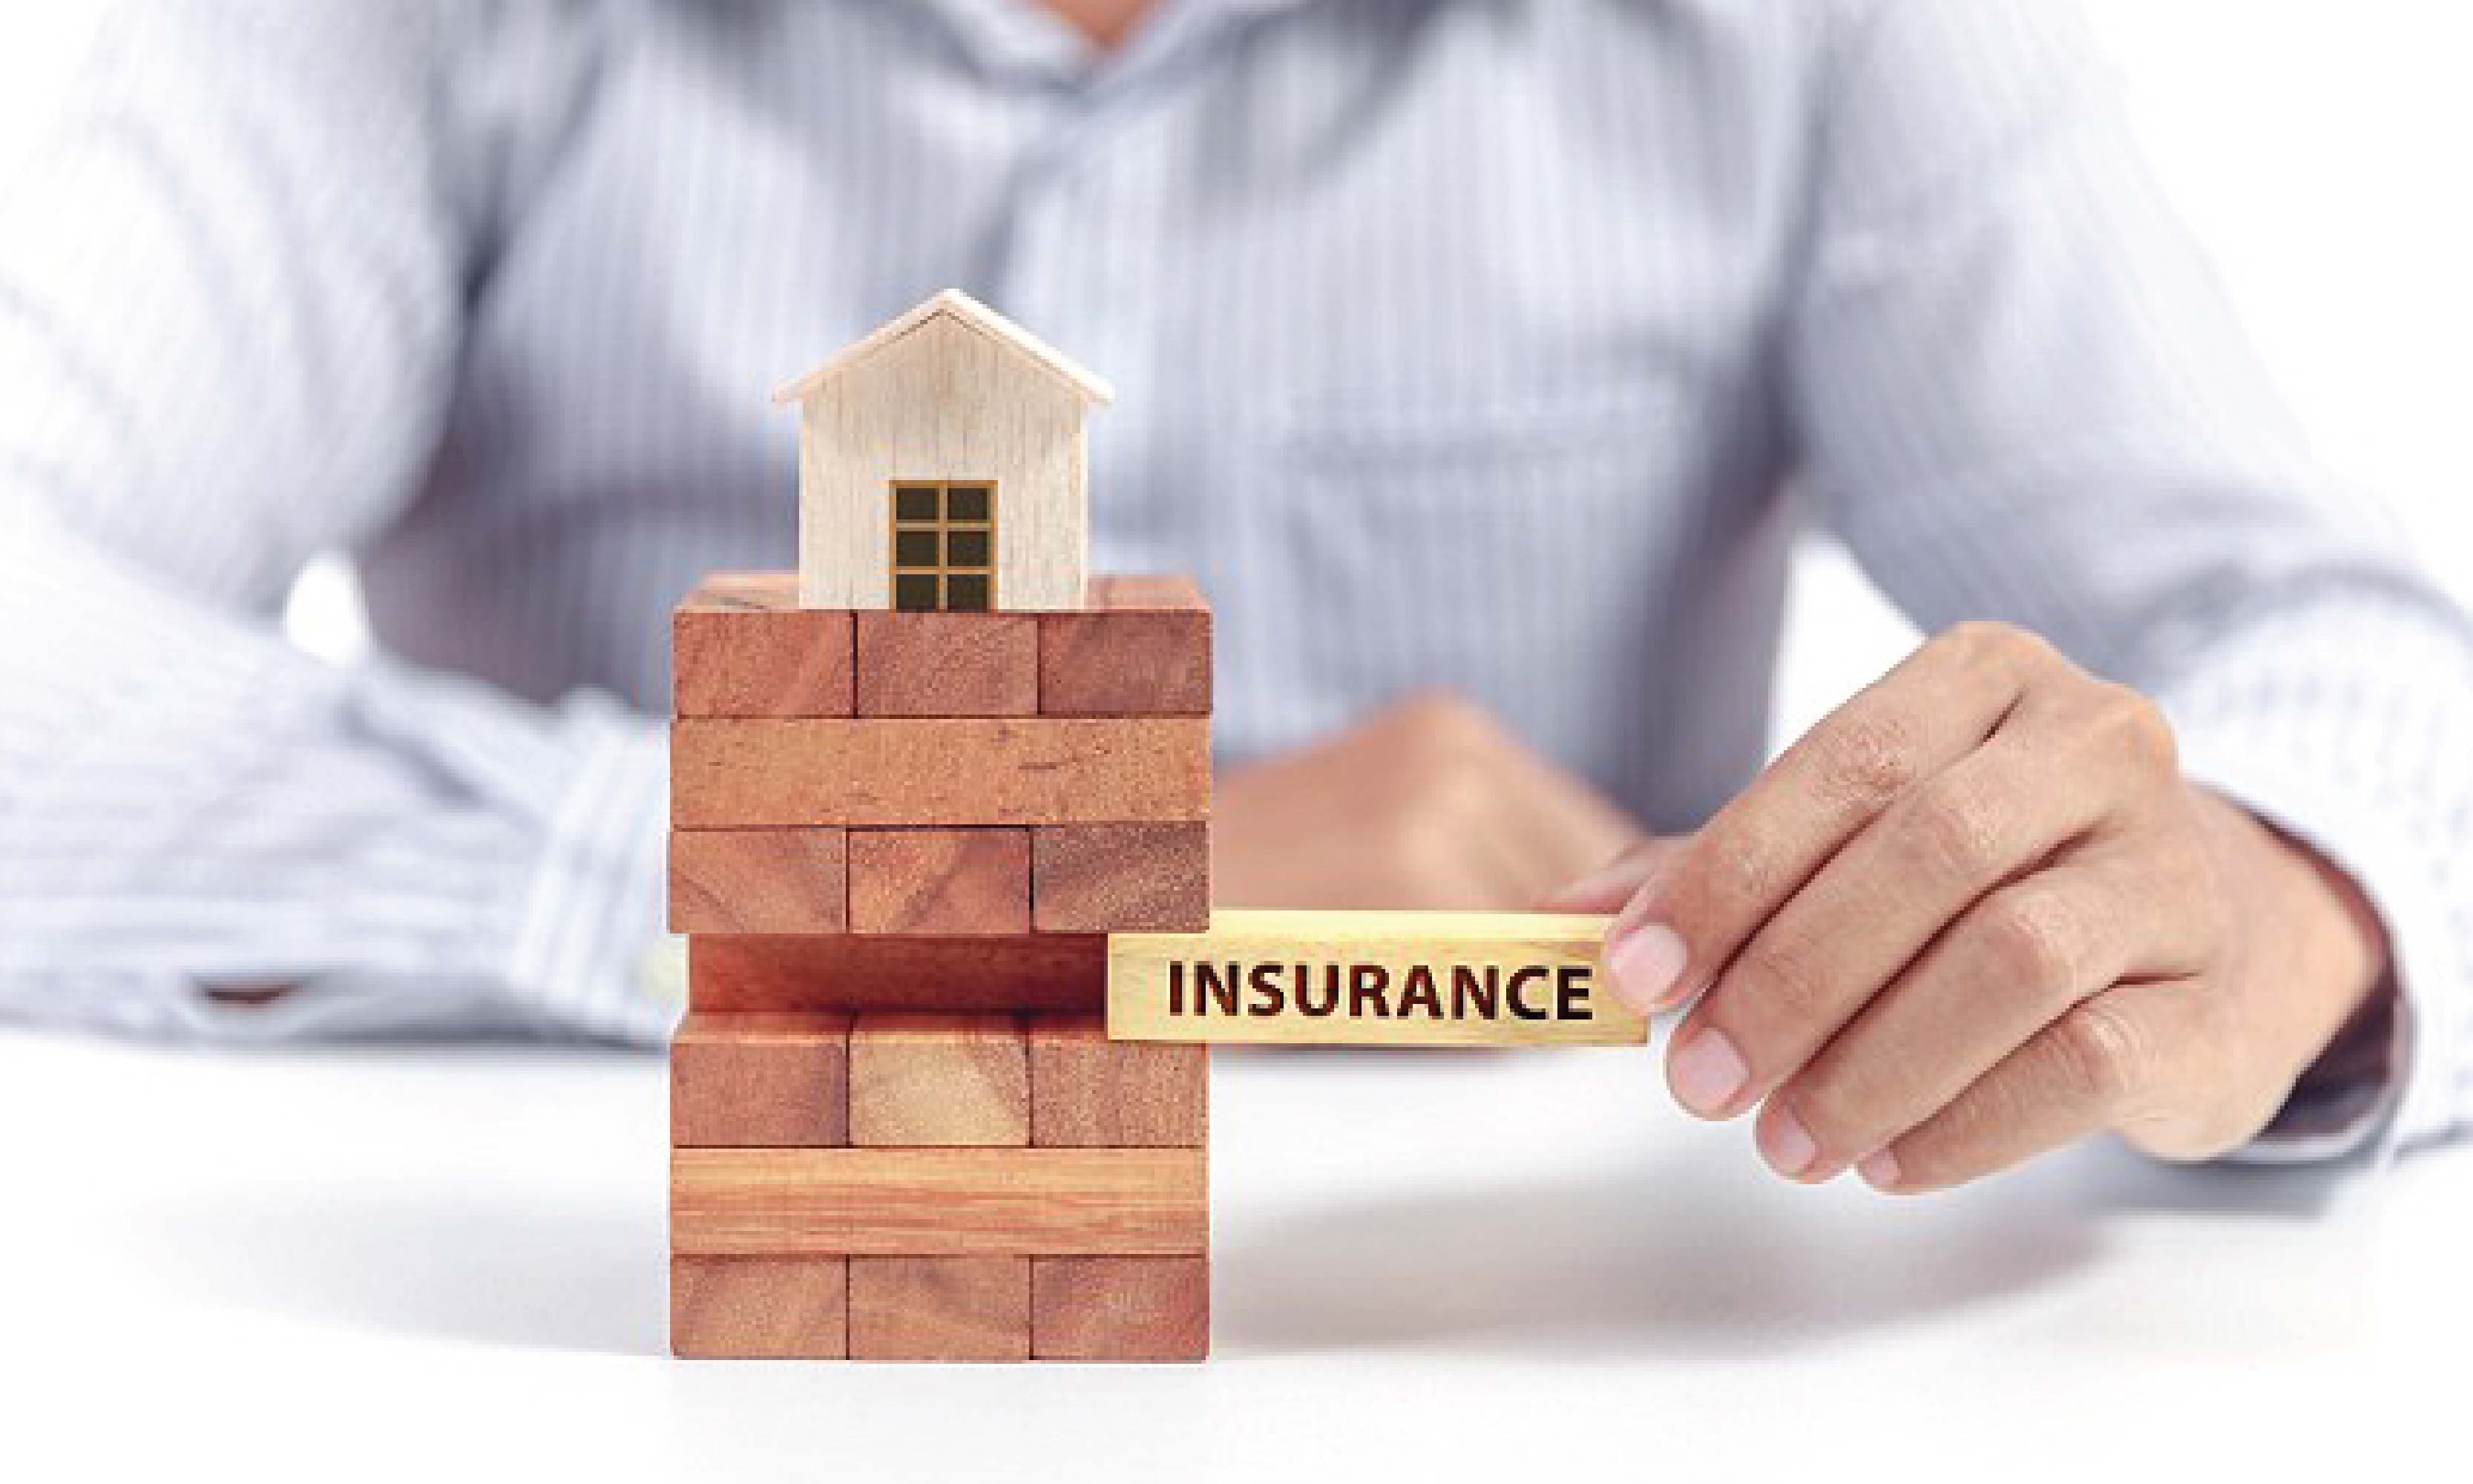 Who can Purchase a Home Insurance Policy?